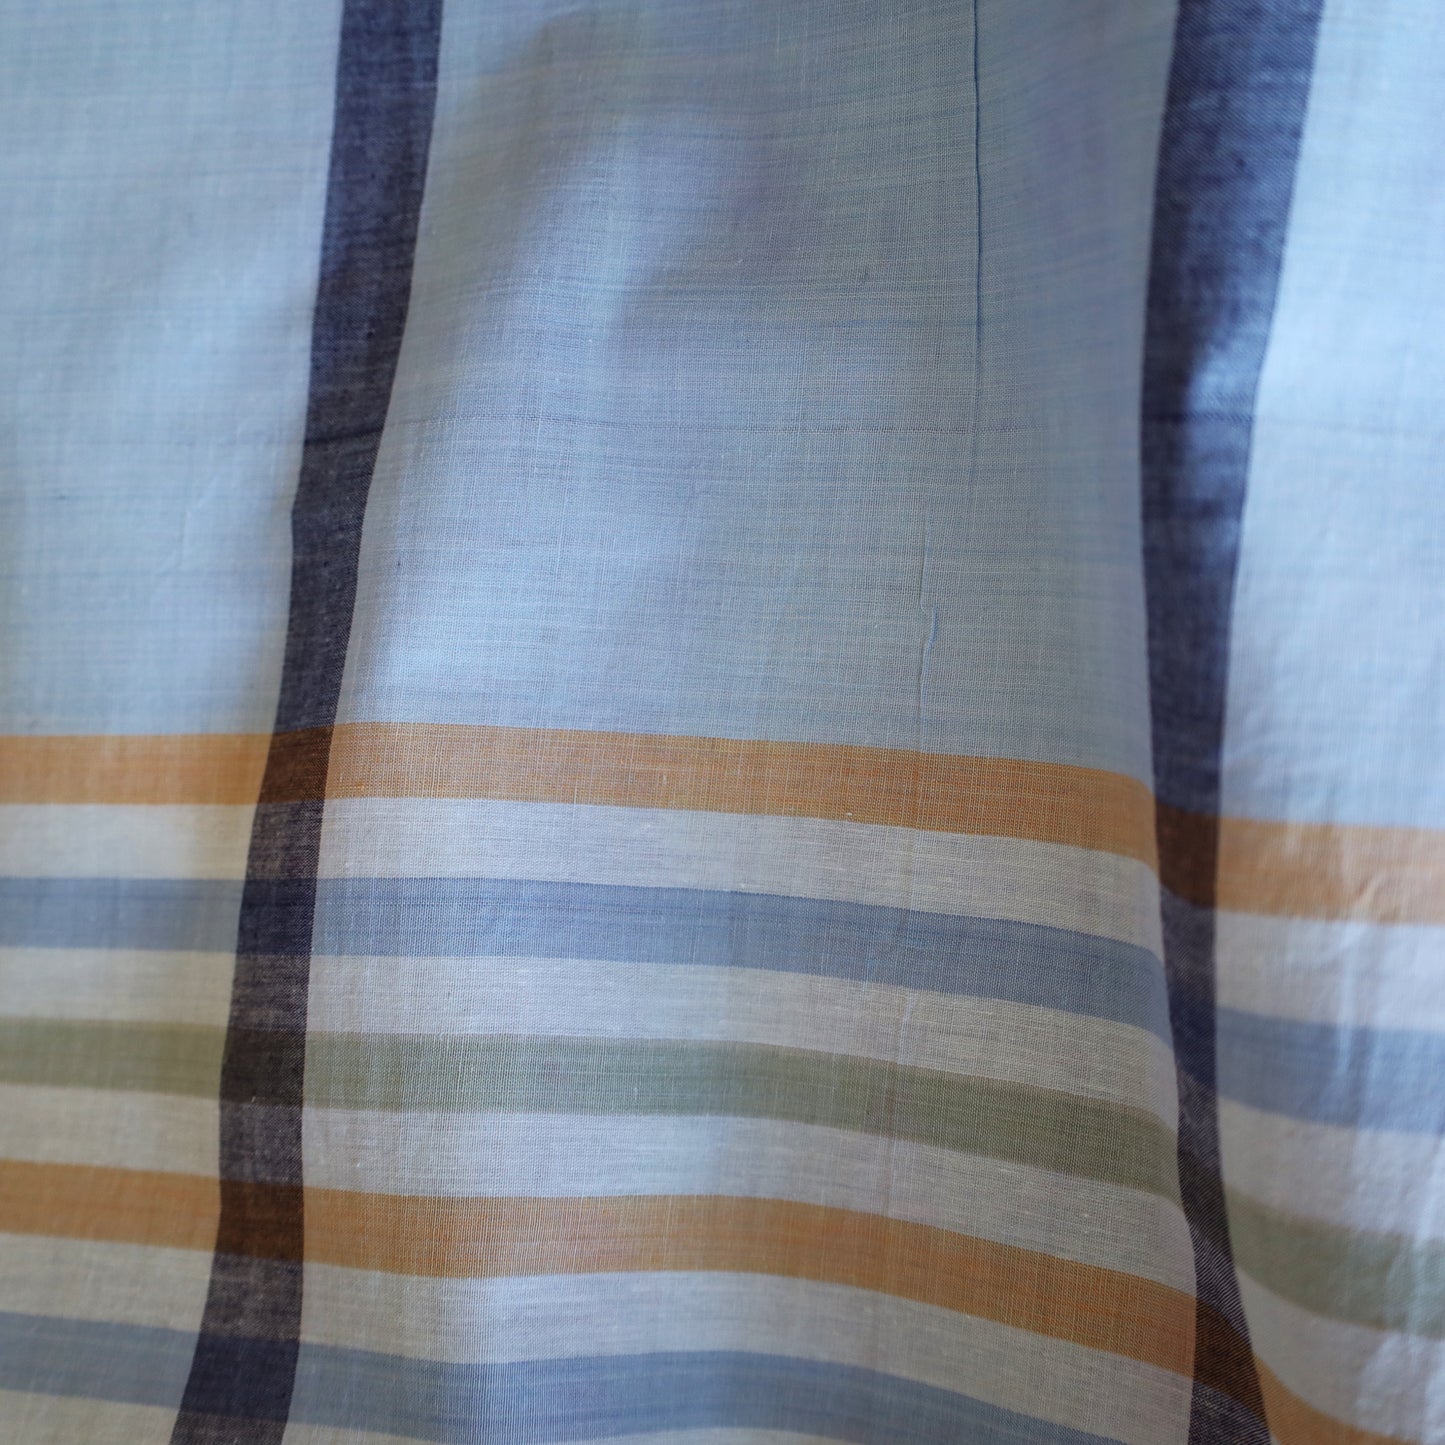 One-of-a-Kind Handloom Cotton Fabric - Blue and Navy with Pastel Stripes